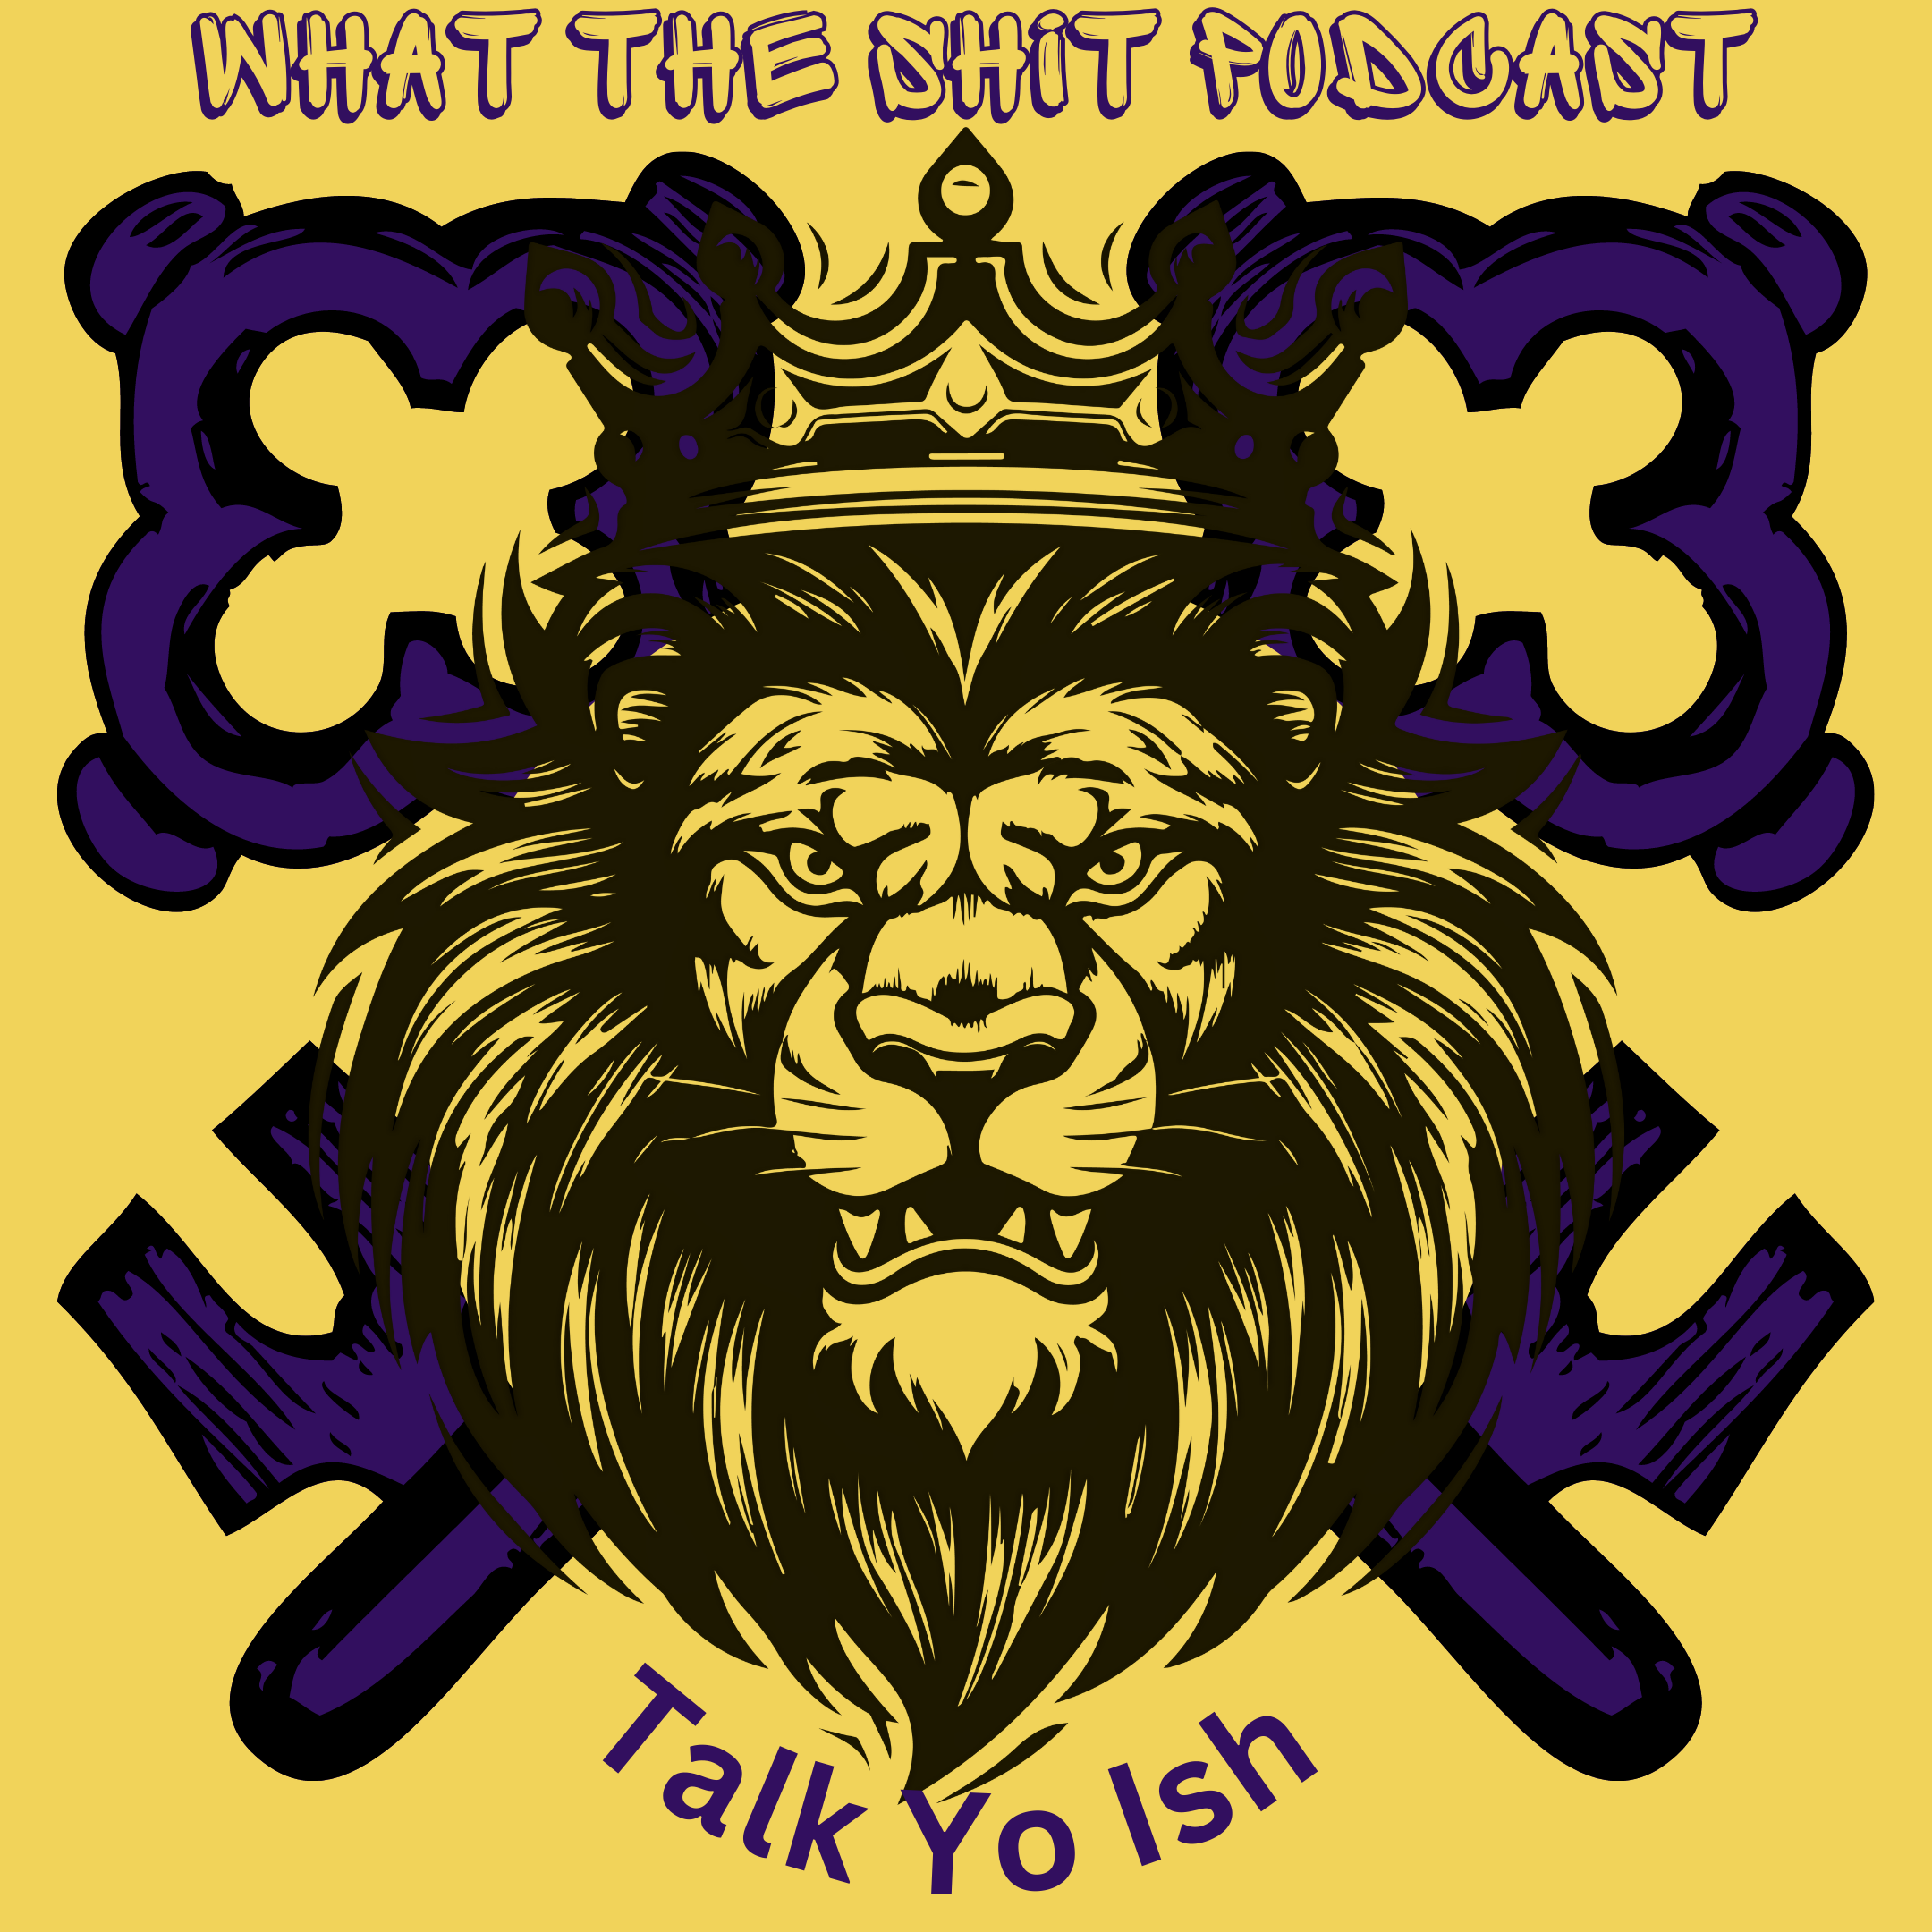 Show artwork for WHAT THE SHIT PODCAST